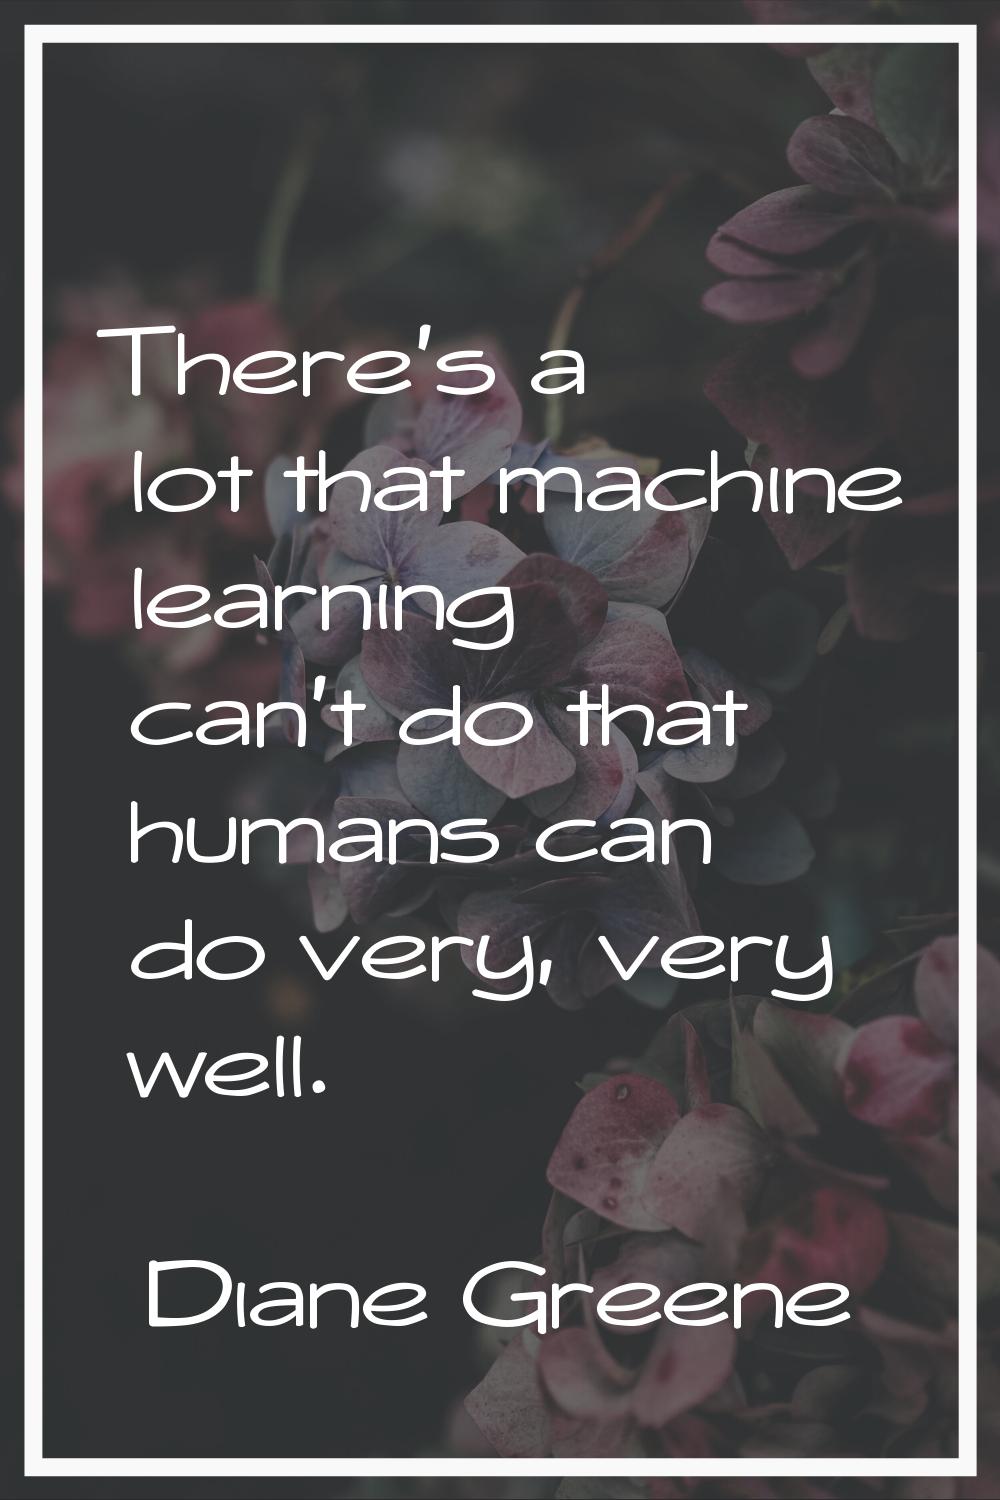 There's a lot that machine learning can't do that humans can do very, very well.